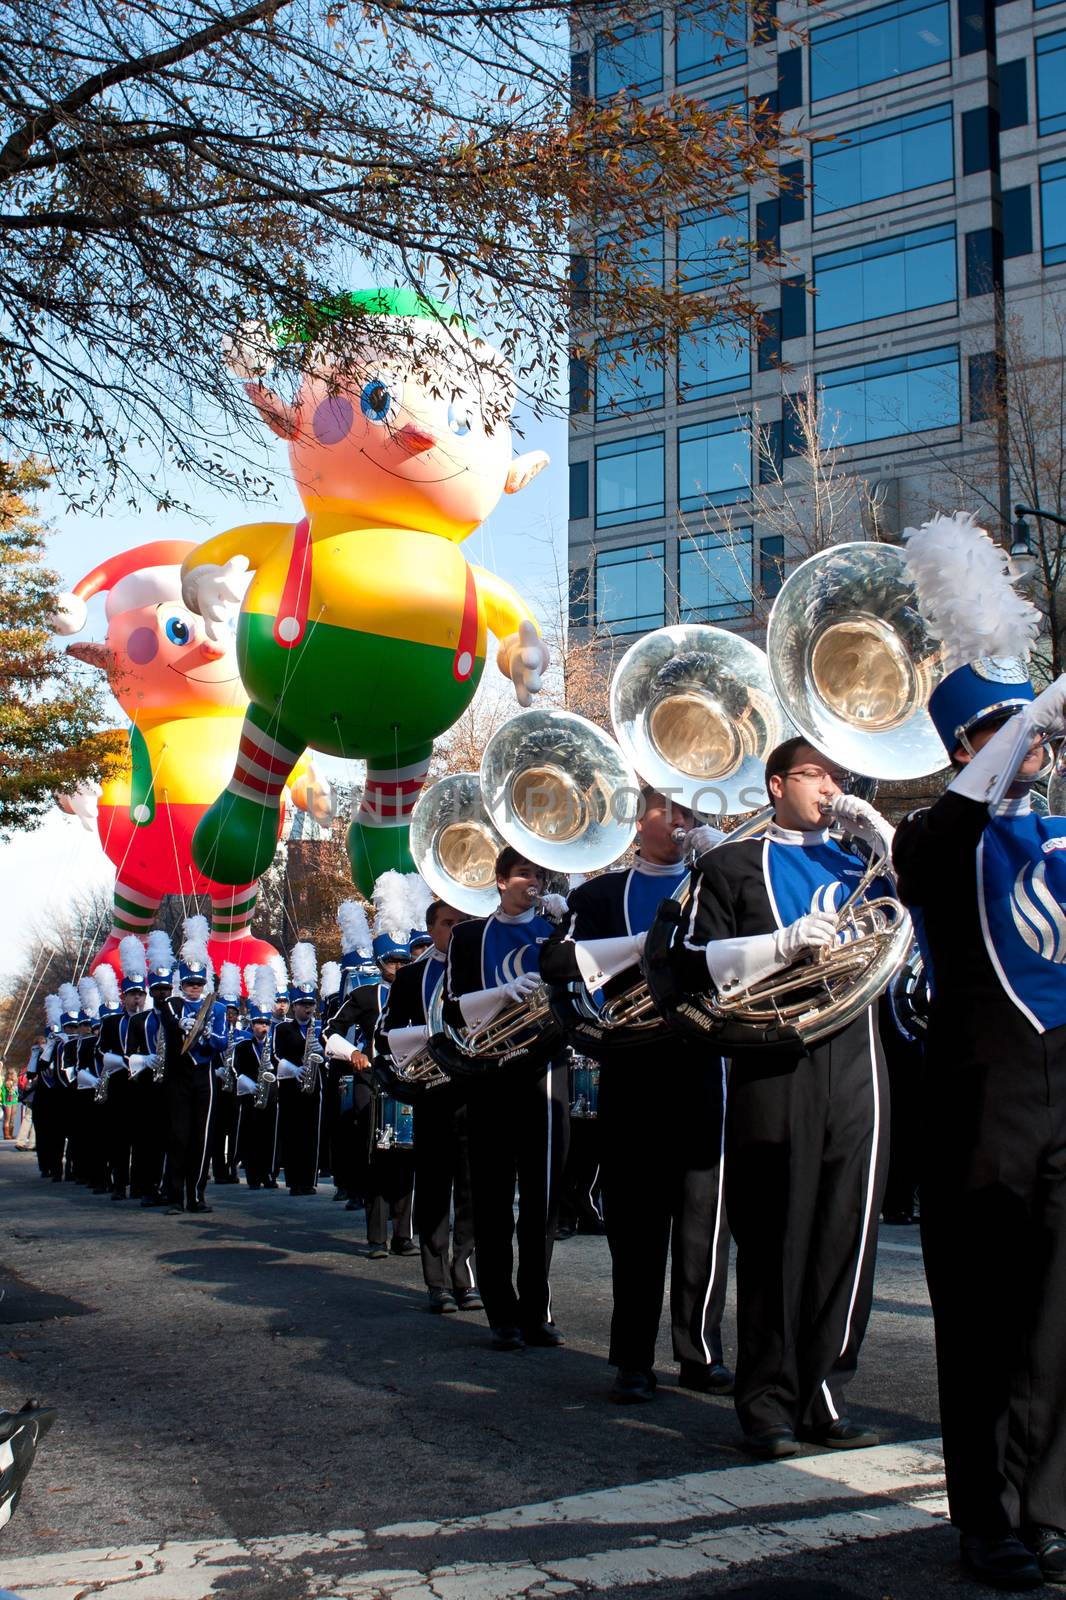 Marching Band Plays In Atlanta Christmas Parade by BluIz60